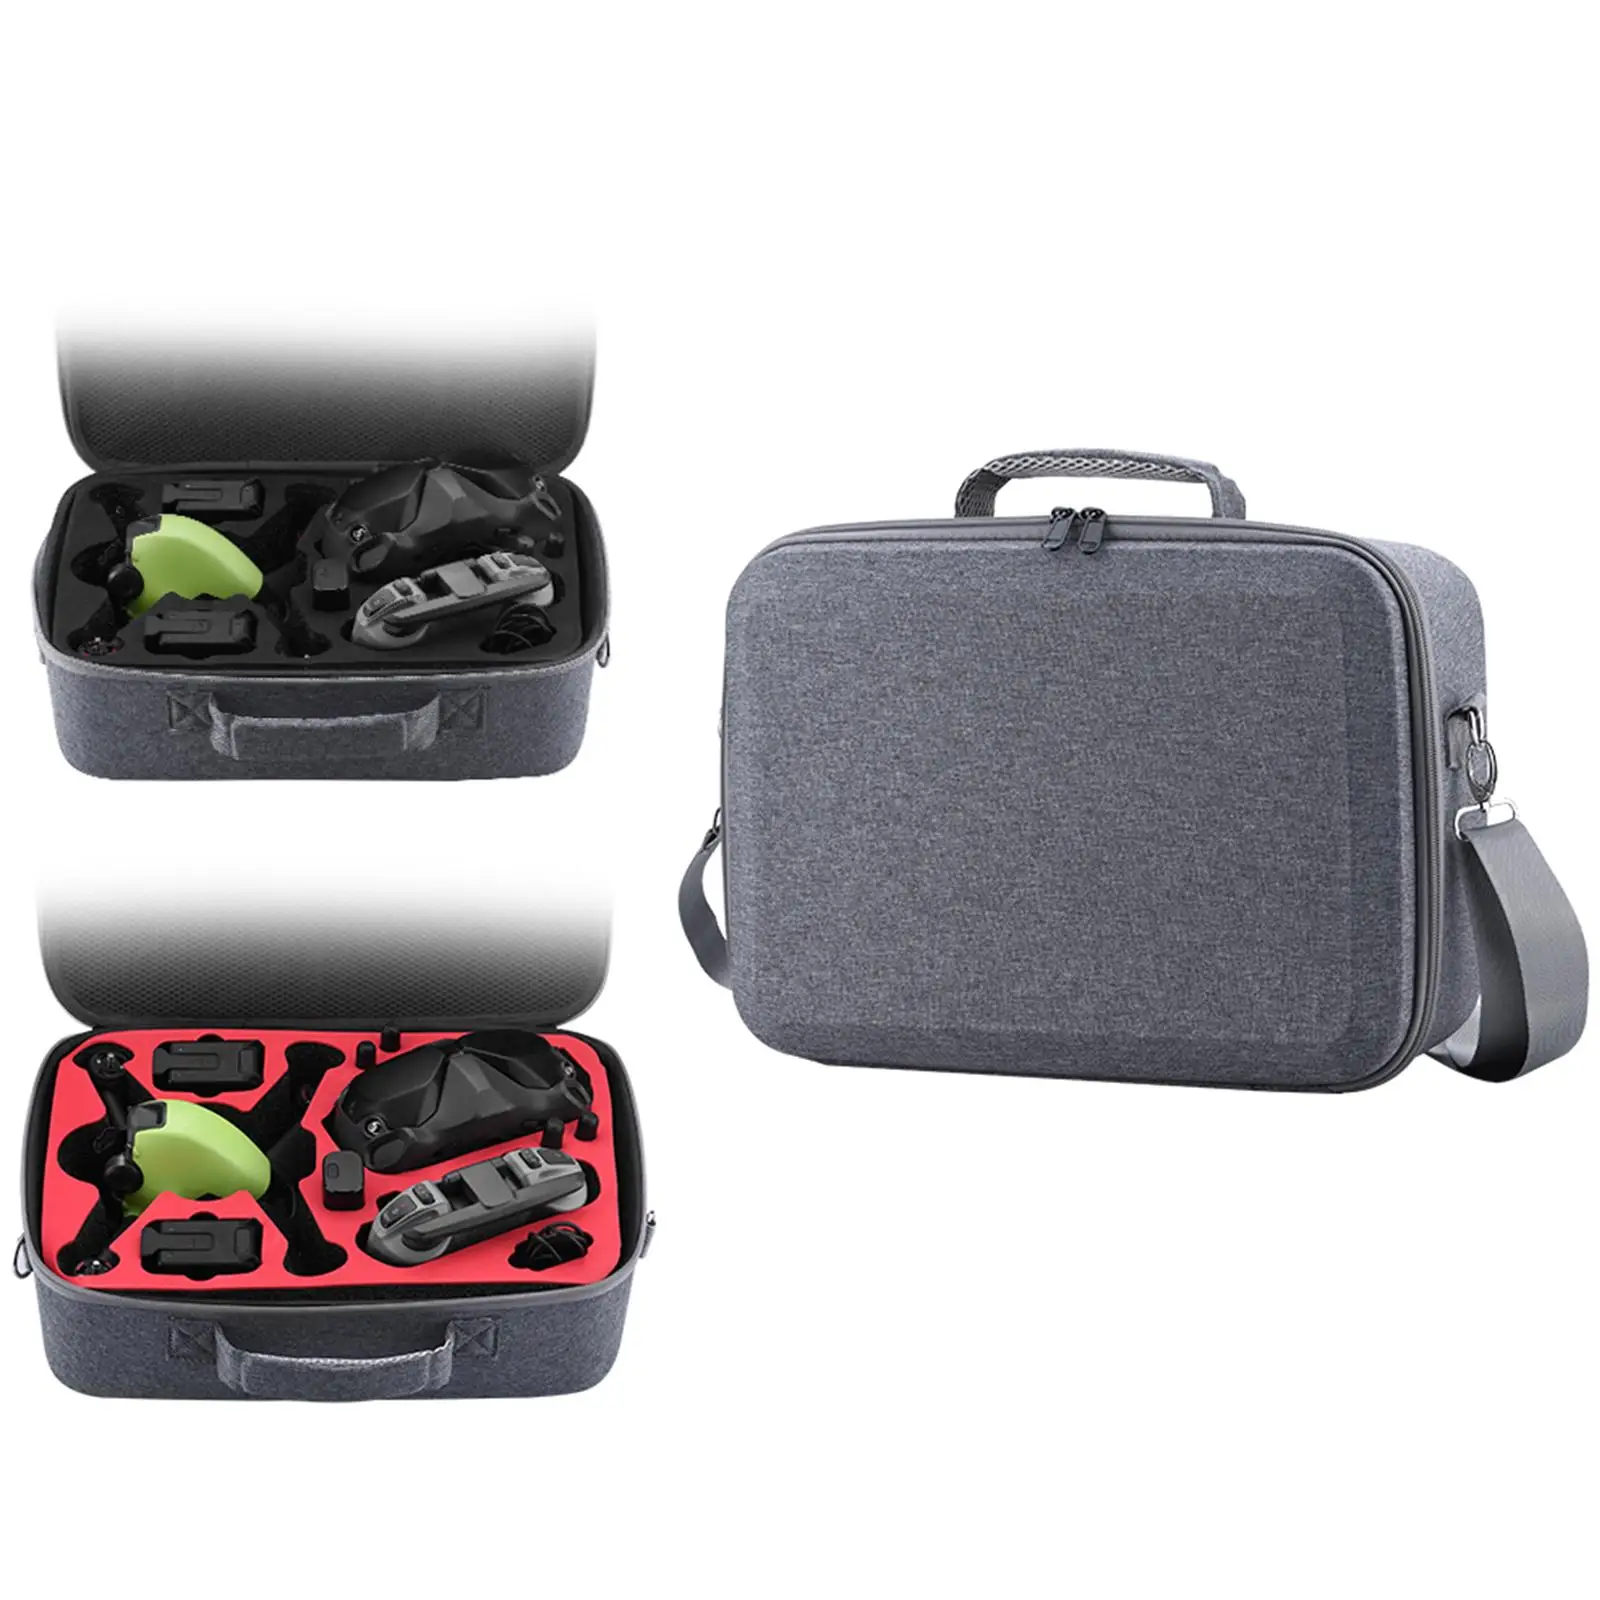 Portable Drone Storage Carrying Case for DJI FPV Shockproof Handbag Outdoor